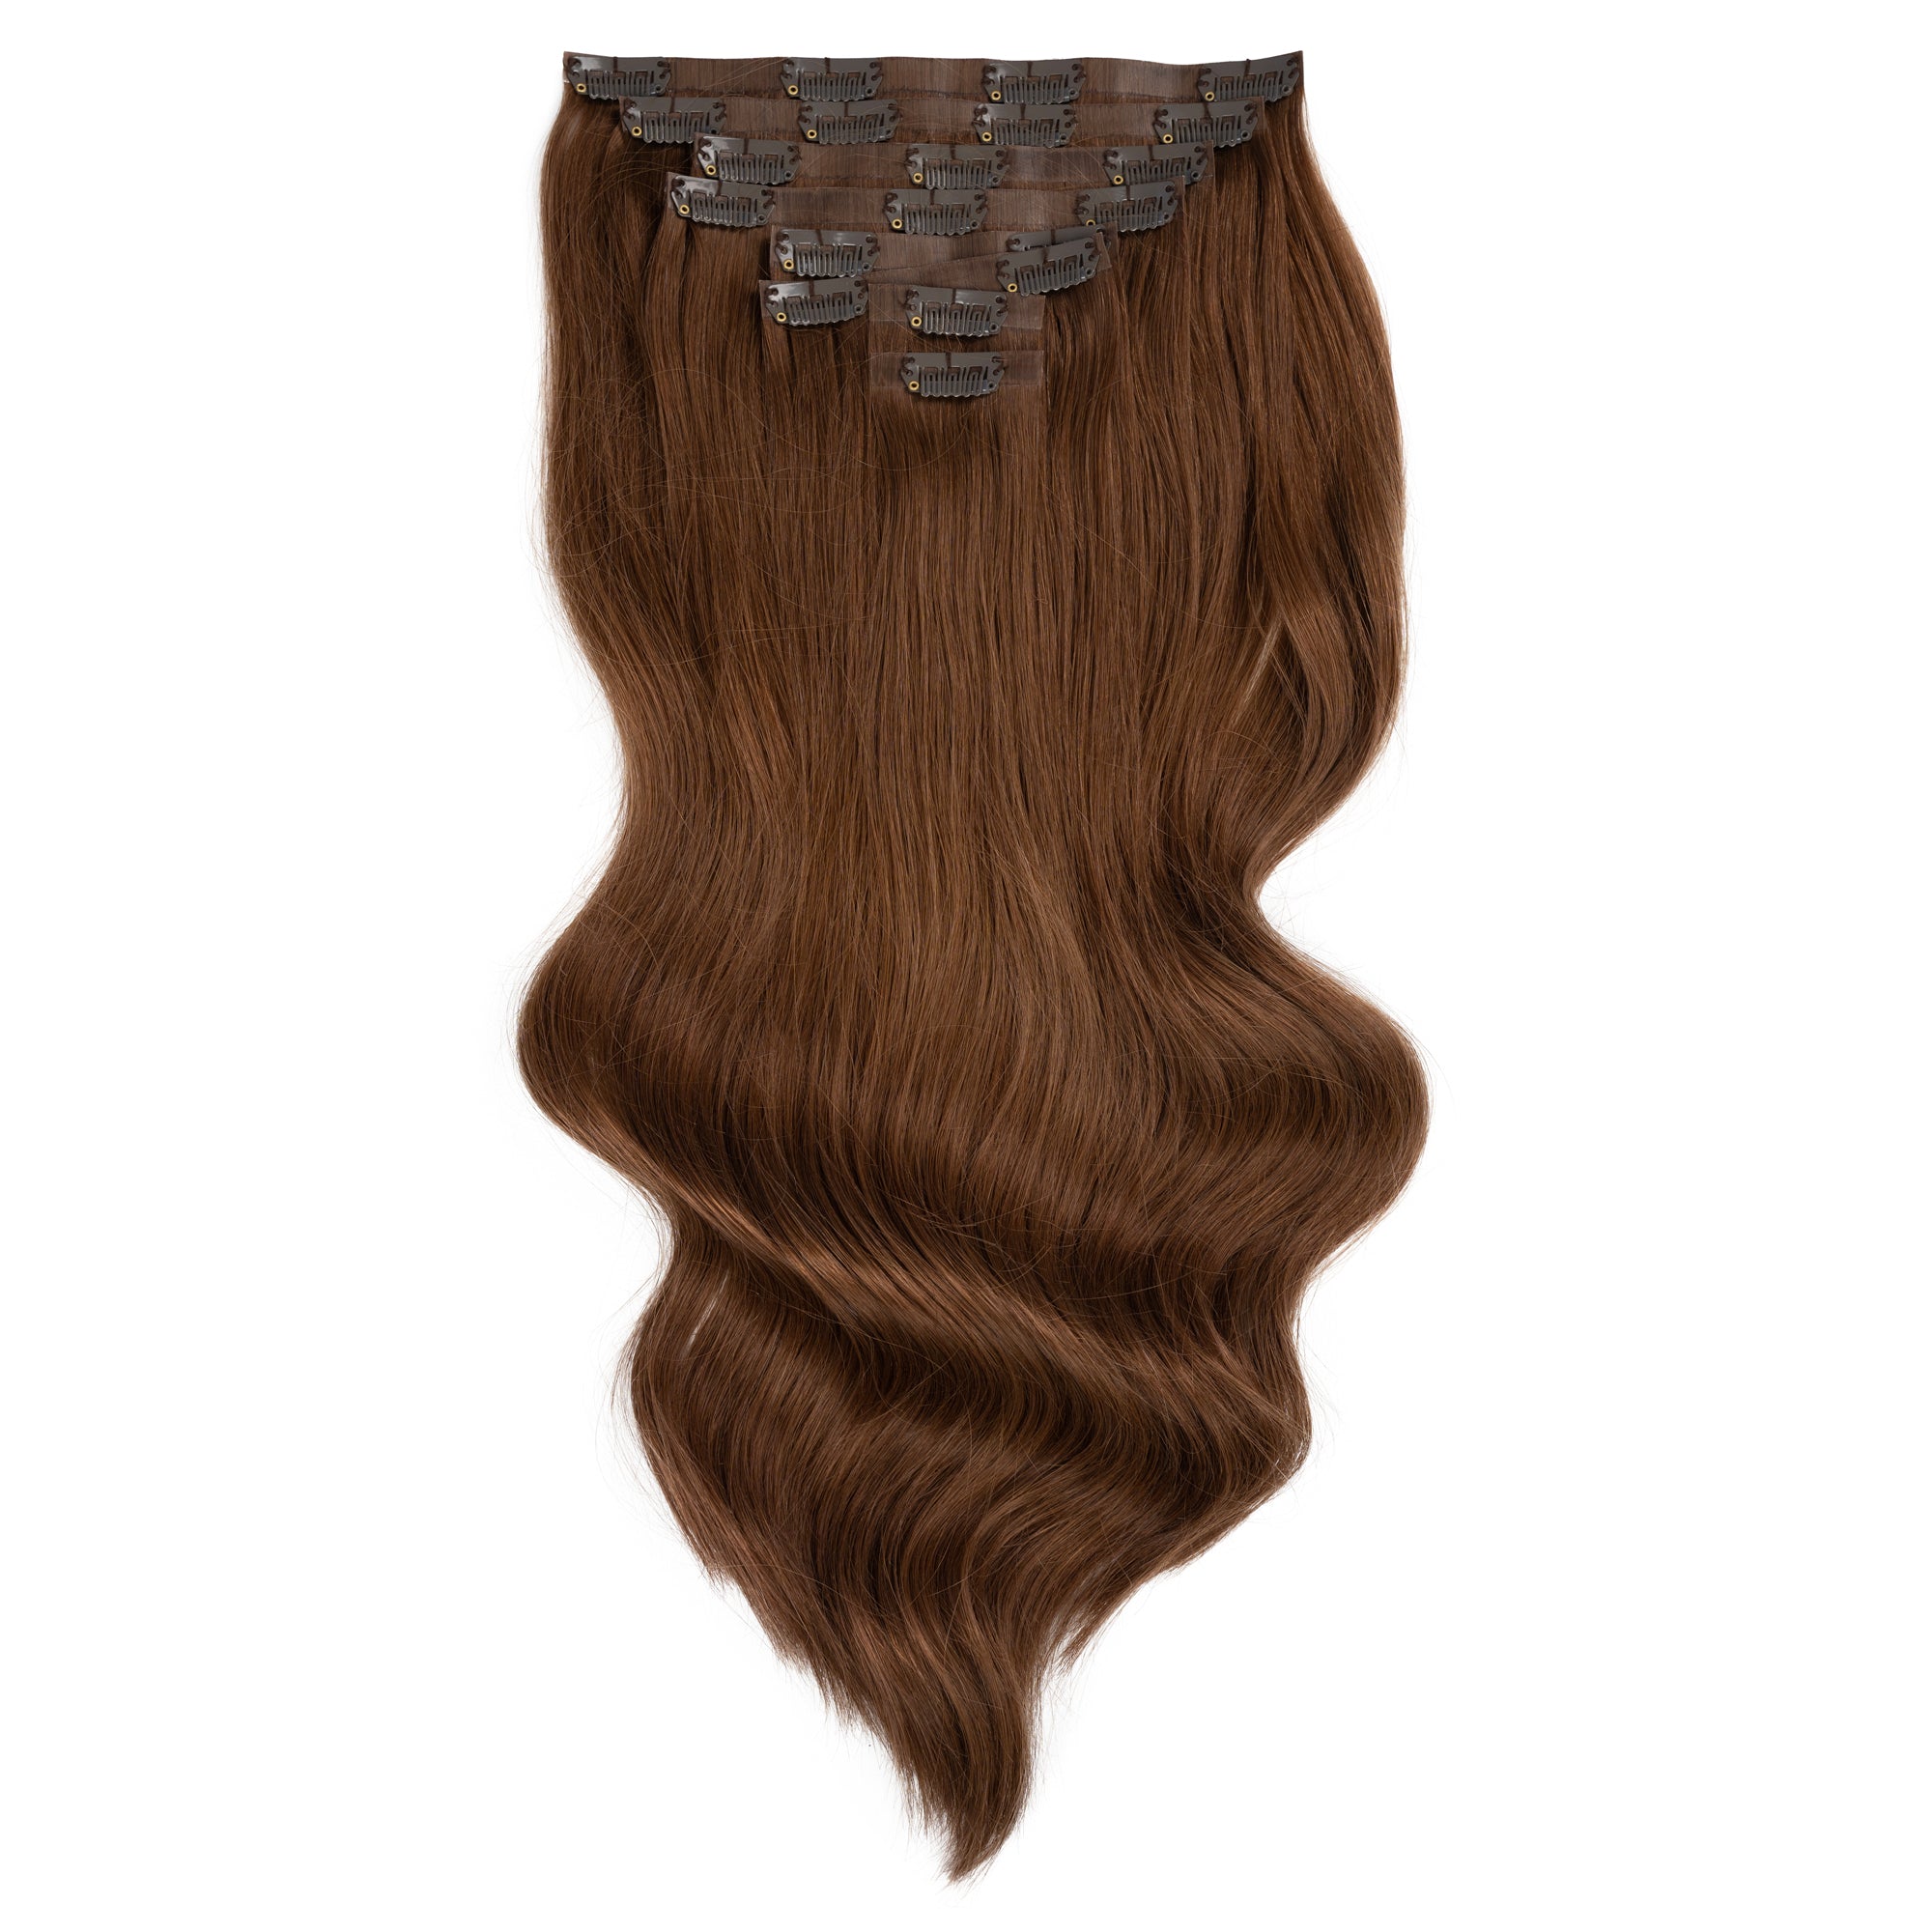 Empress Deluxe Clip In Hair Extensions 20" Colour 5 Light Brown - Maneology Hair Extensions